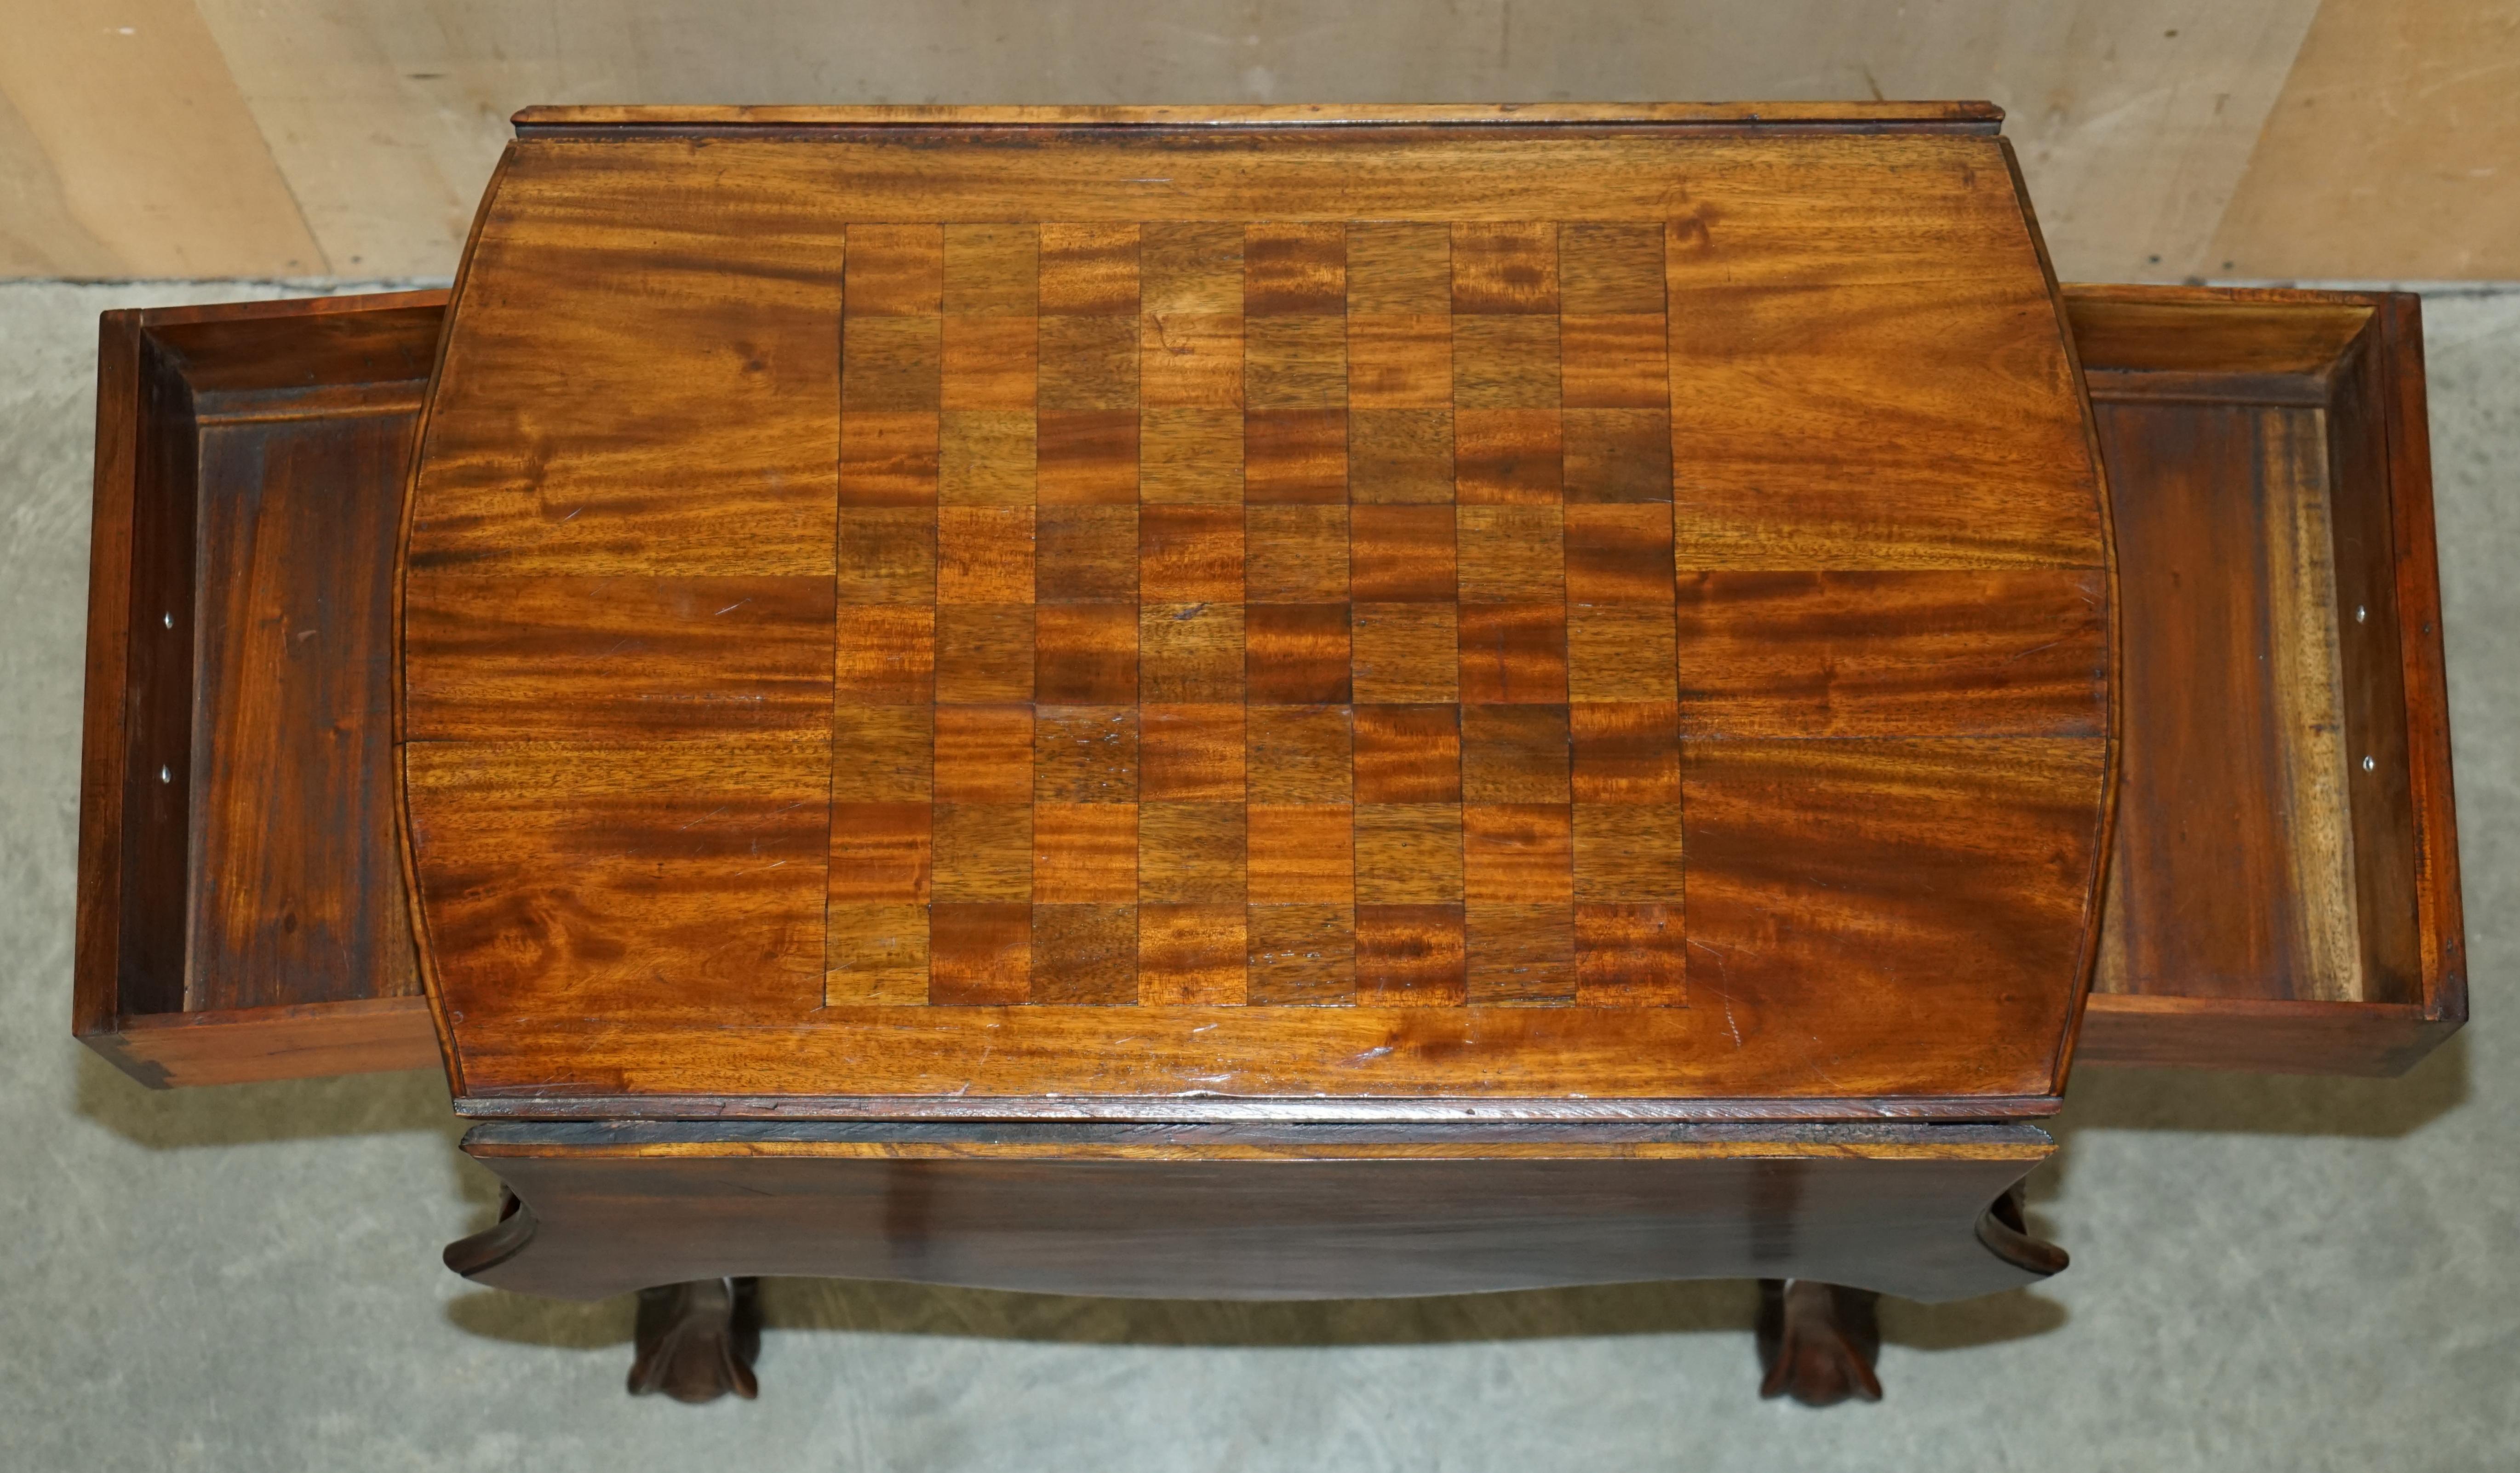 EXQUISITE TABLE DE CHESSAGE A PIEDS The Claw & Ball EXTENDiNG CHESS BOARD STYLE Thomas Chippendale en vente 10